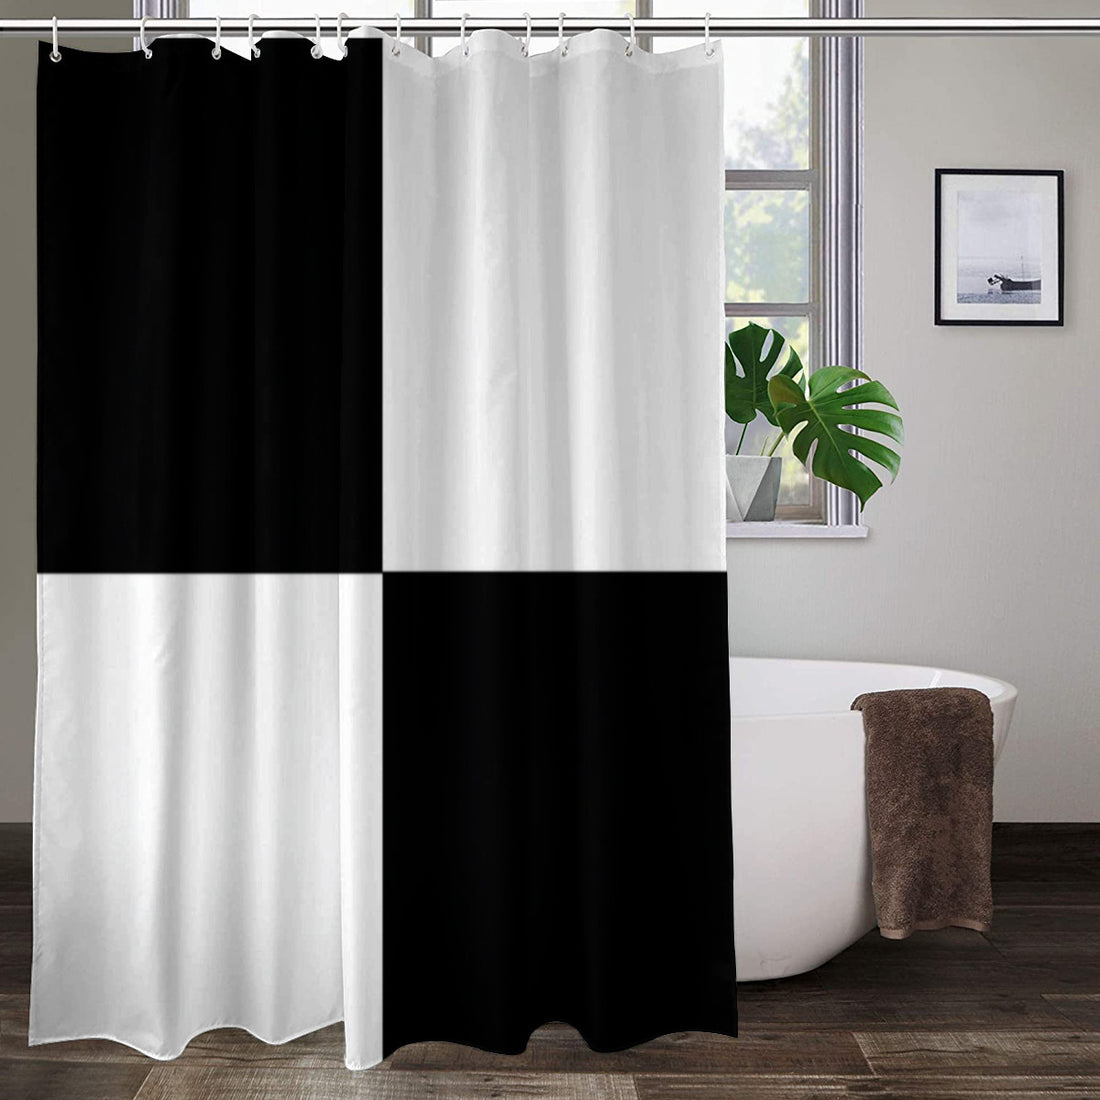 Shower curtain black and white 2 Home-clothes-jewelry